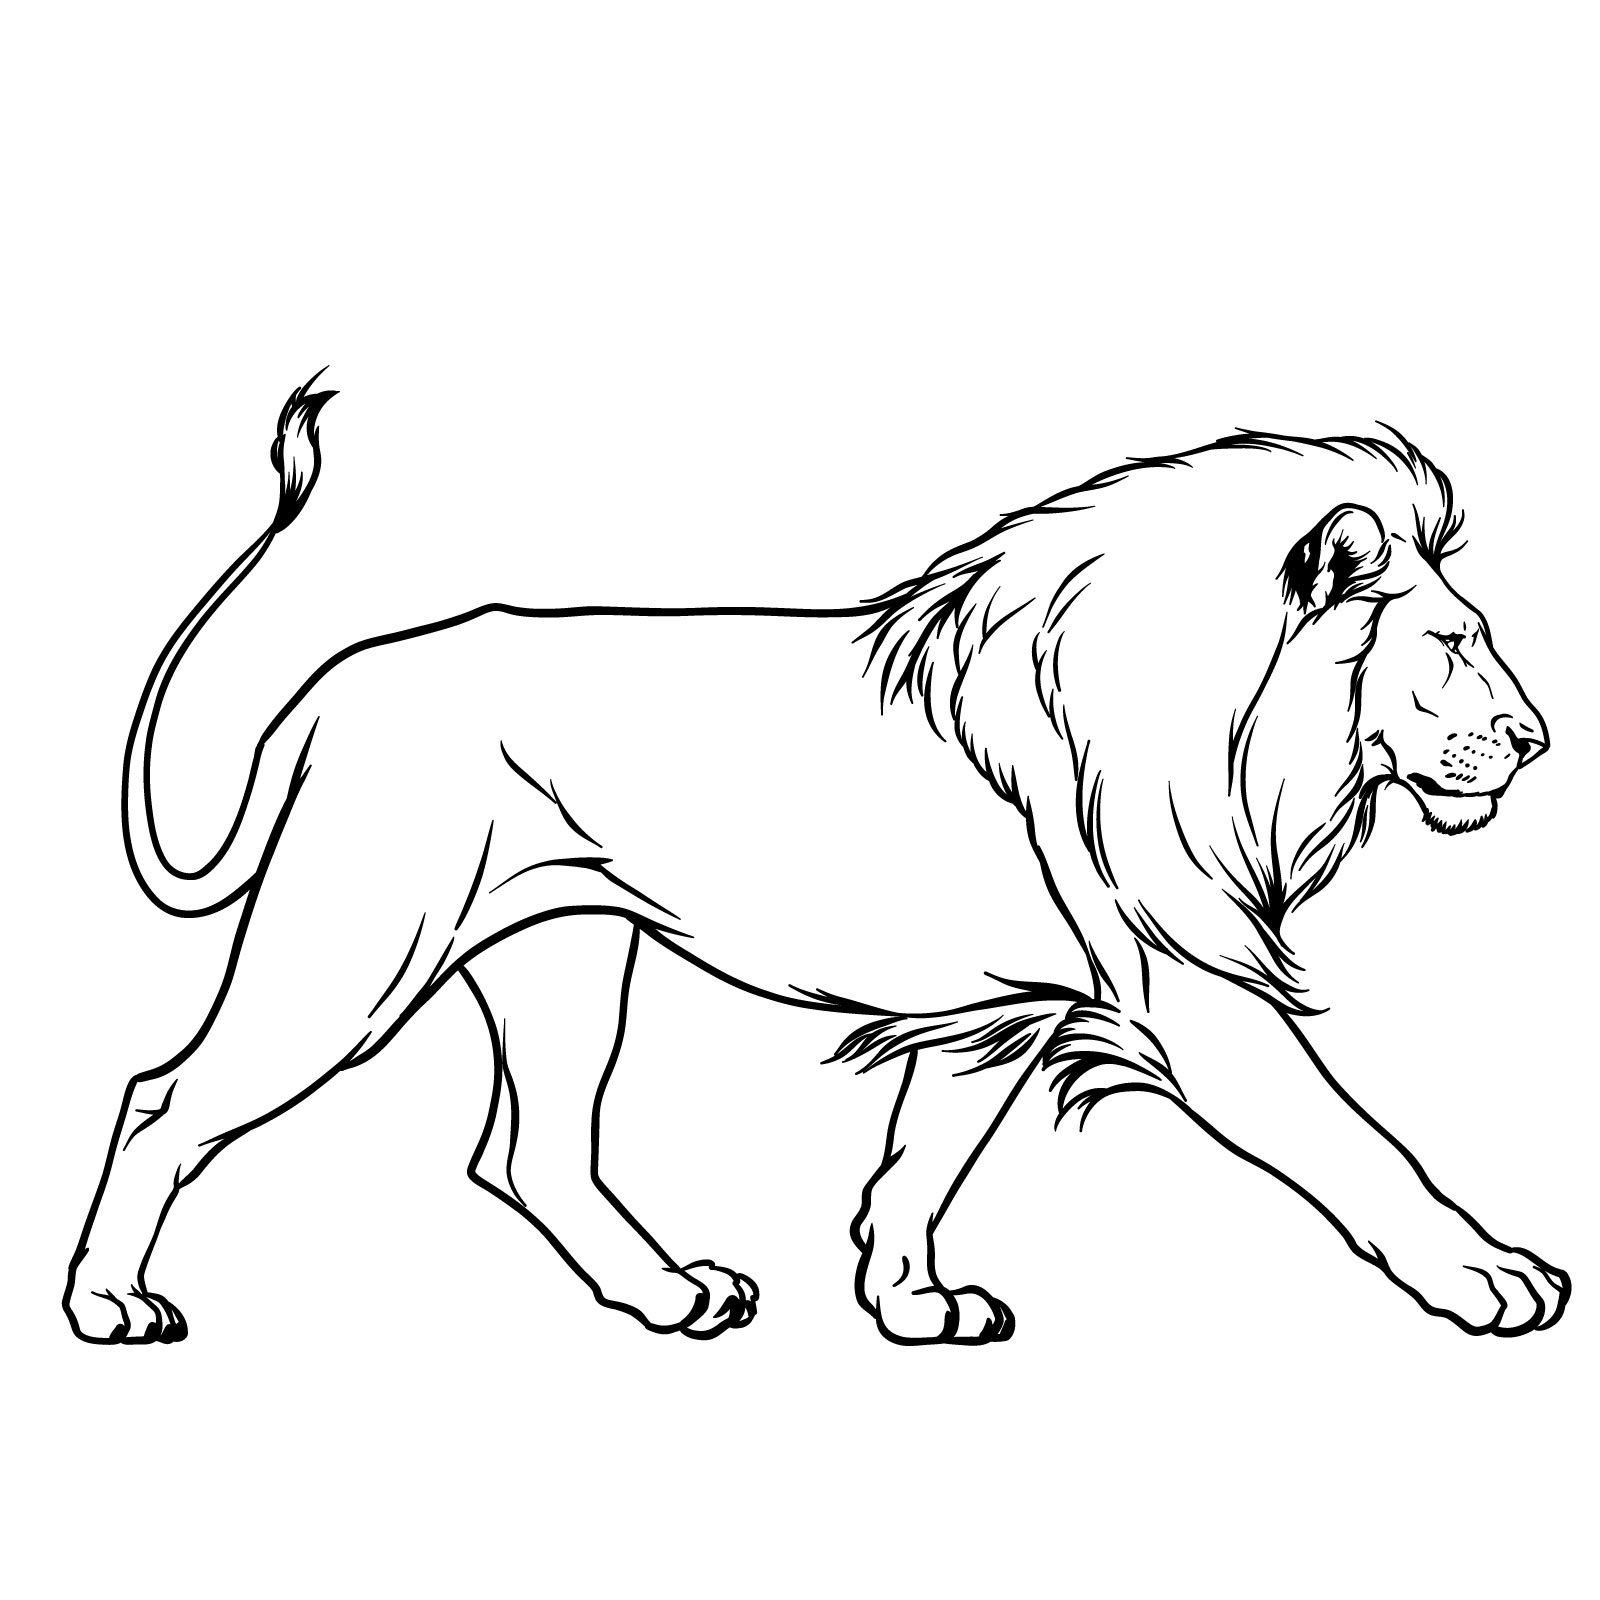 Lion drawing - side view - walking pose - step-by-step drawing tutorial